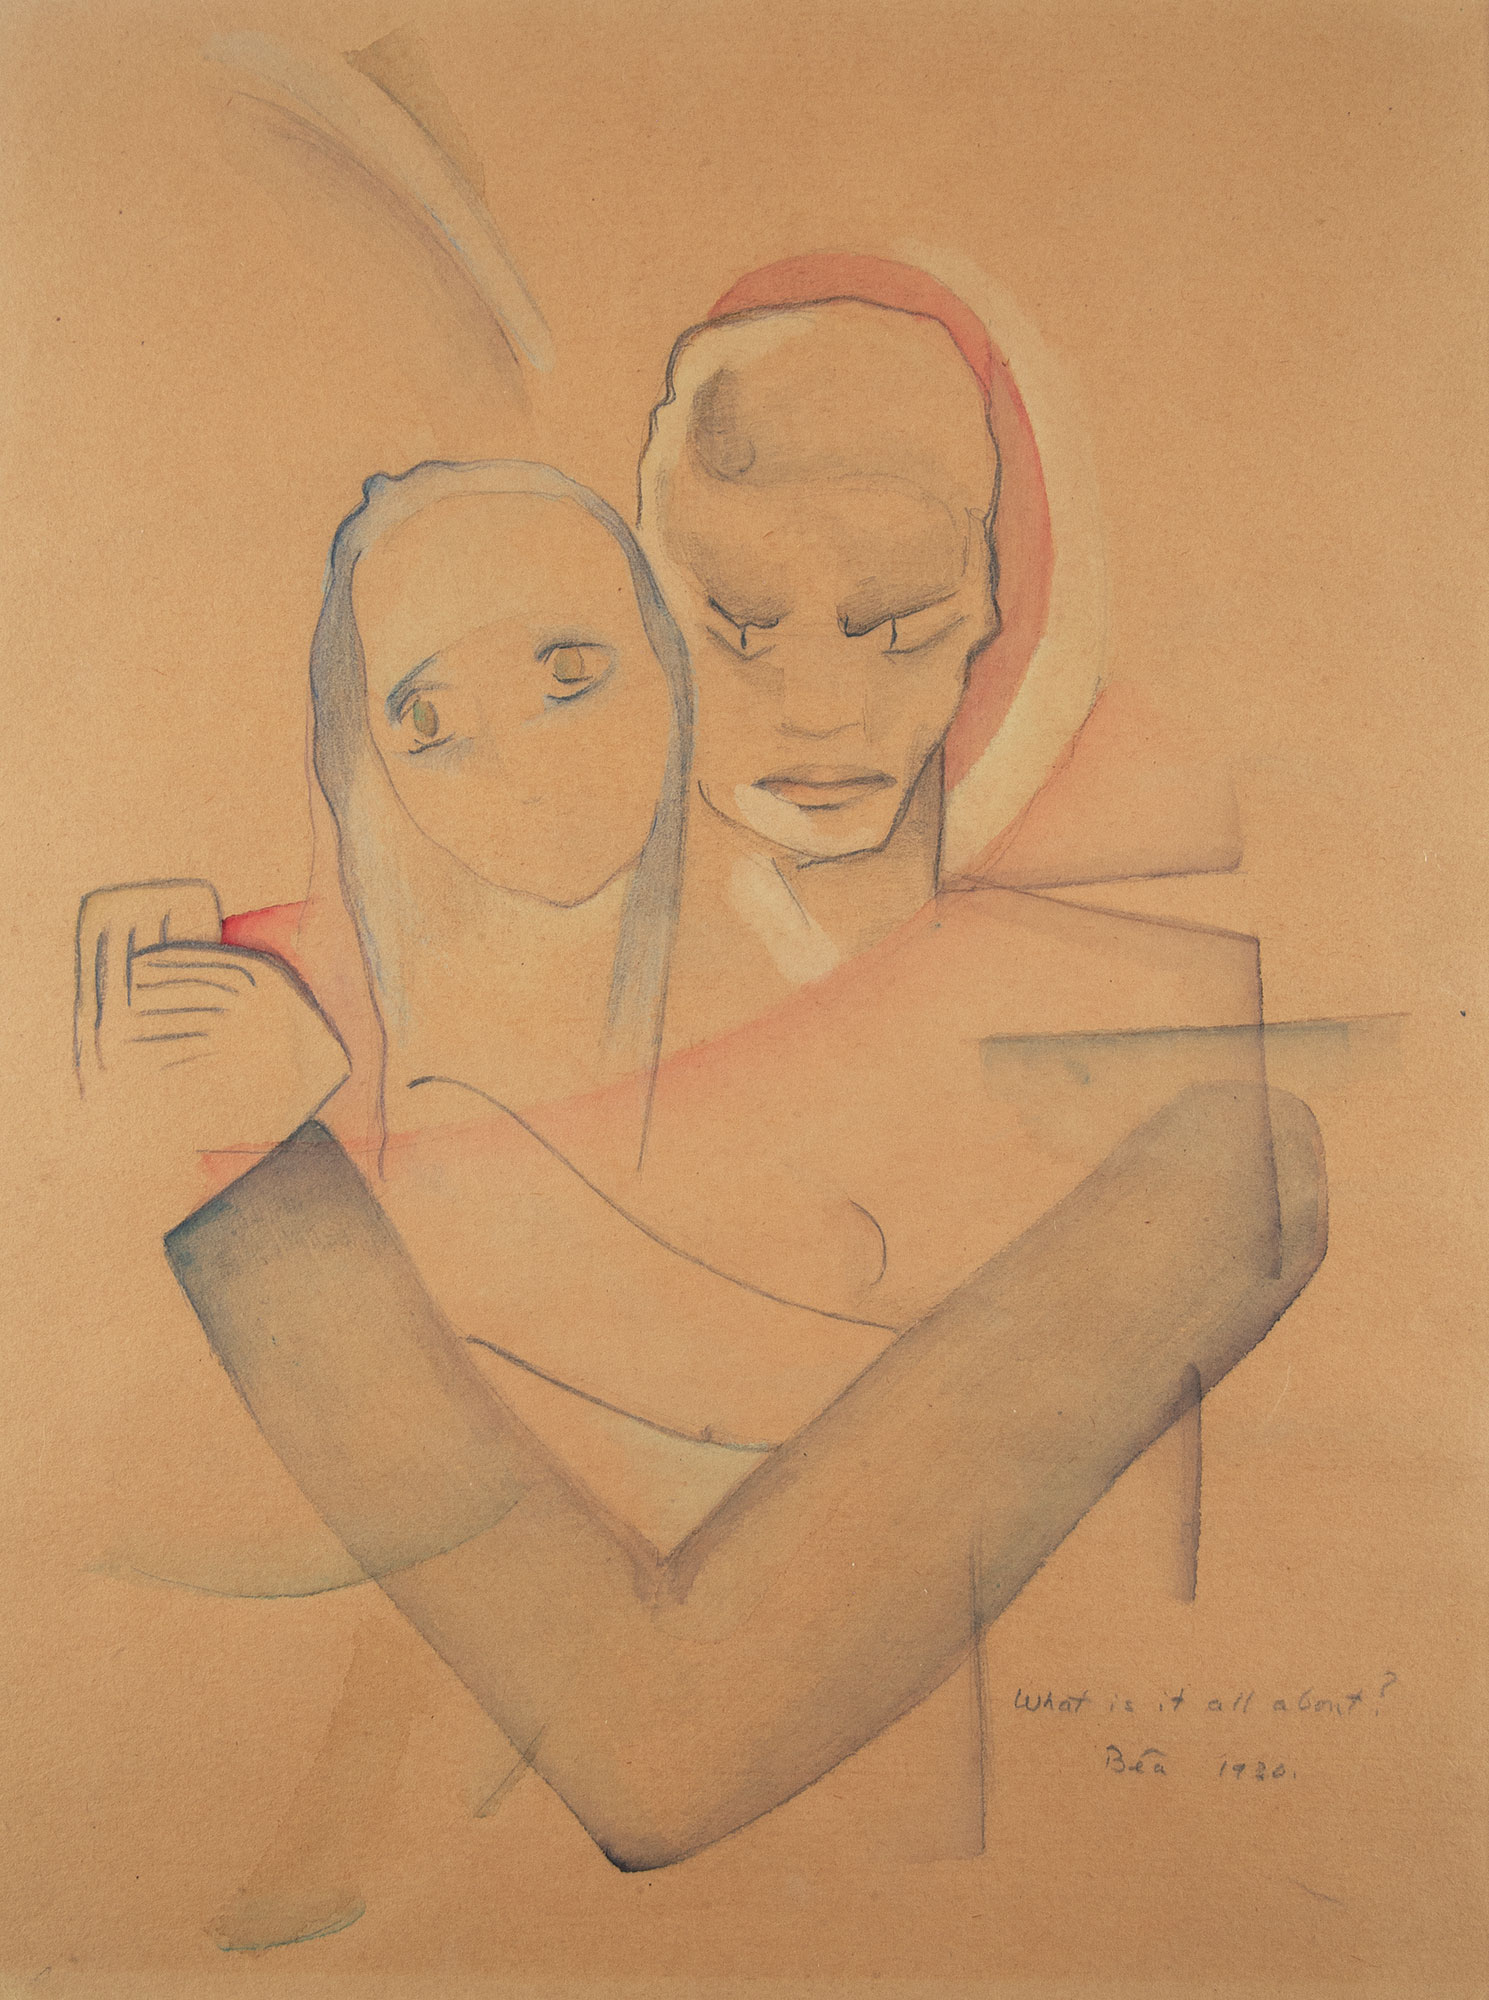 Beatrice Wood / 
What is it all about?, 1930 / 
watercolor and pencil on paper / 
Sheet: 11 3/4 x 8 3/4 in. (29.9 x 22.2 cm) / 
Framed: 18 1/2 x 15 5/8 in. (47 x 39.7 cm)